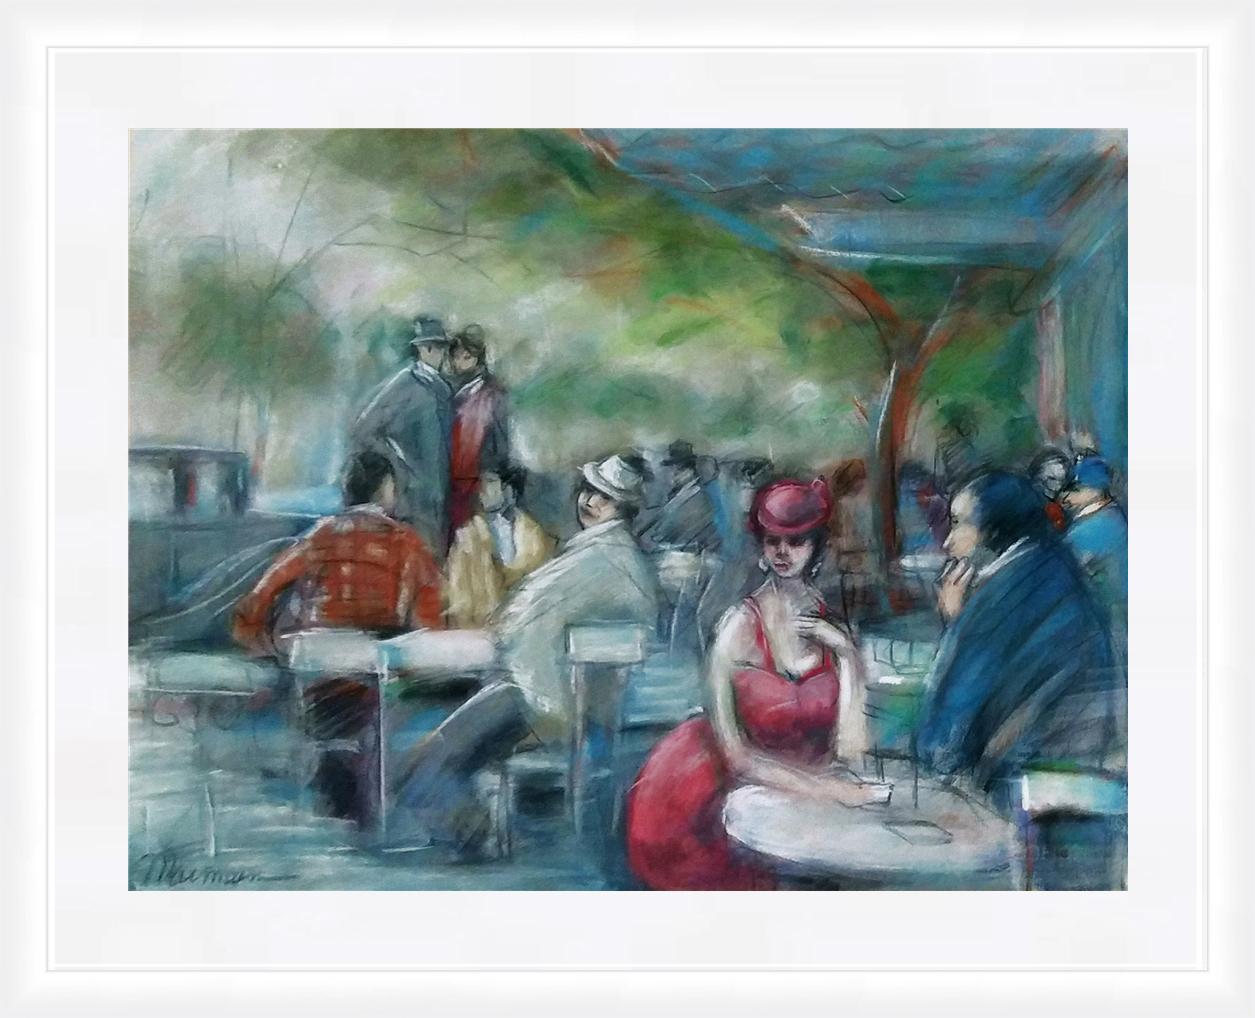 UNTITLED (CAFE SCENE) - Art by Isaac Maimon